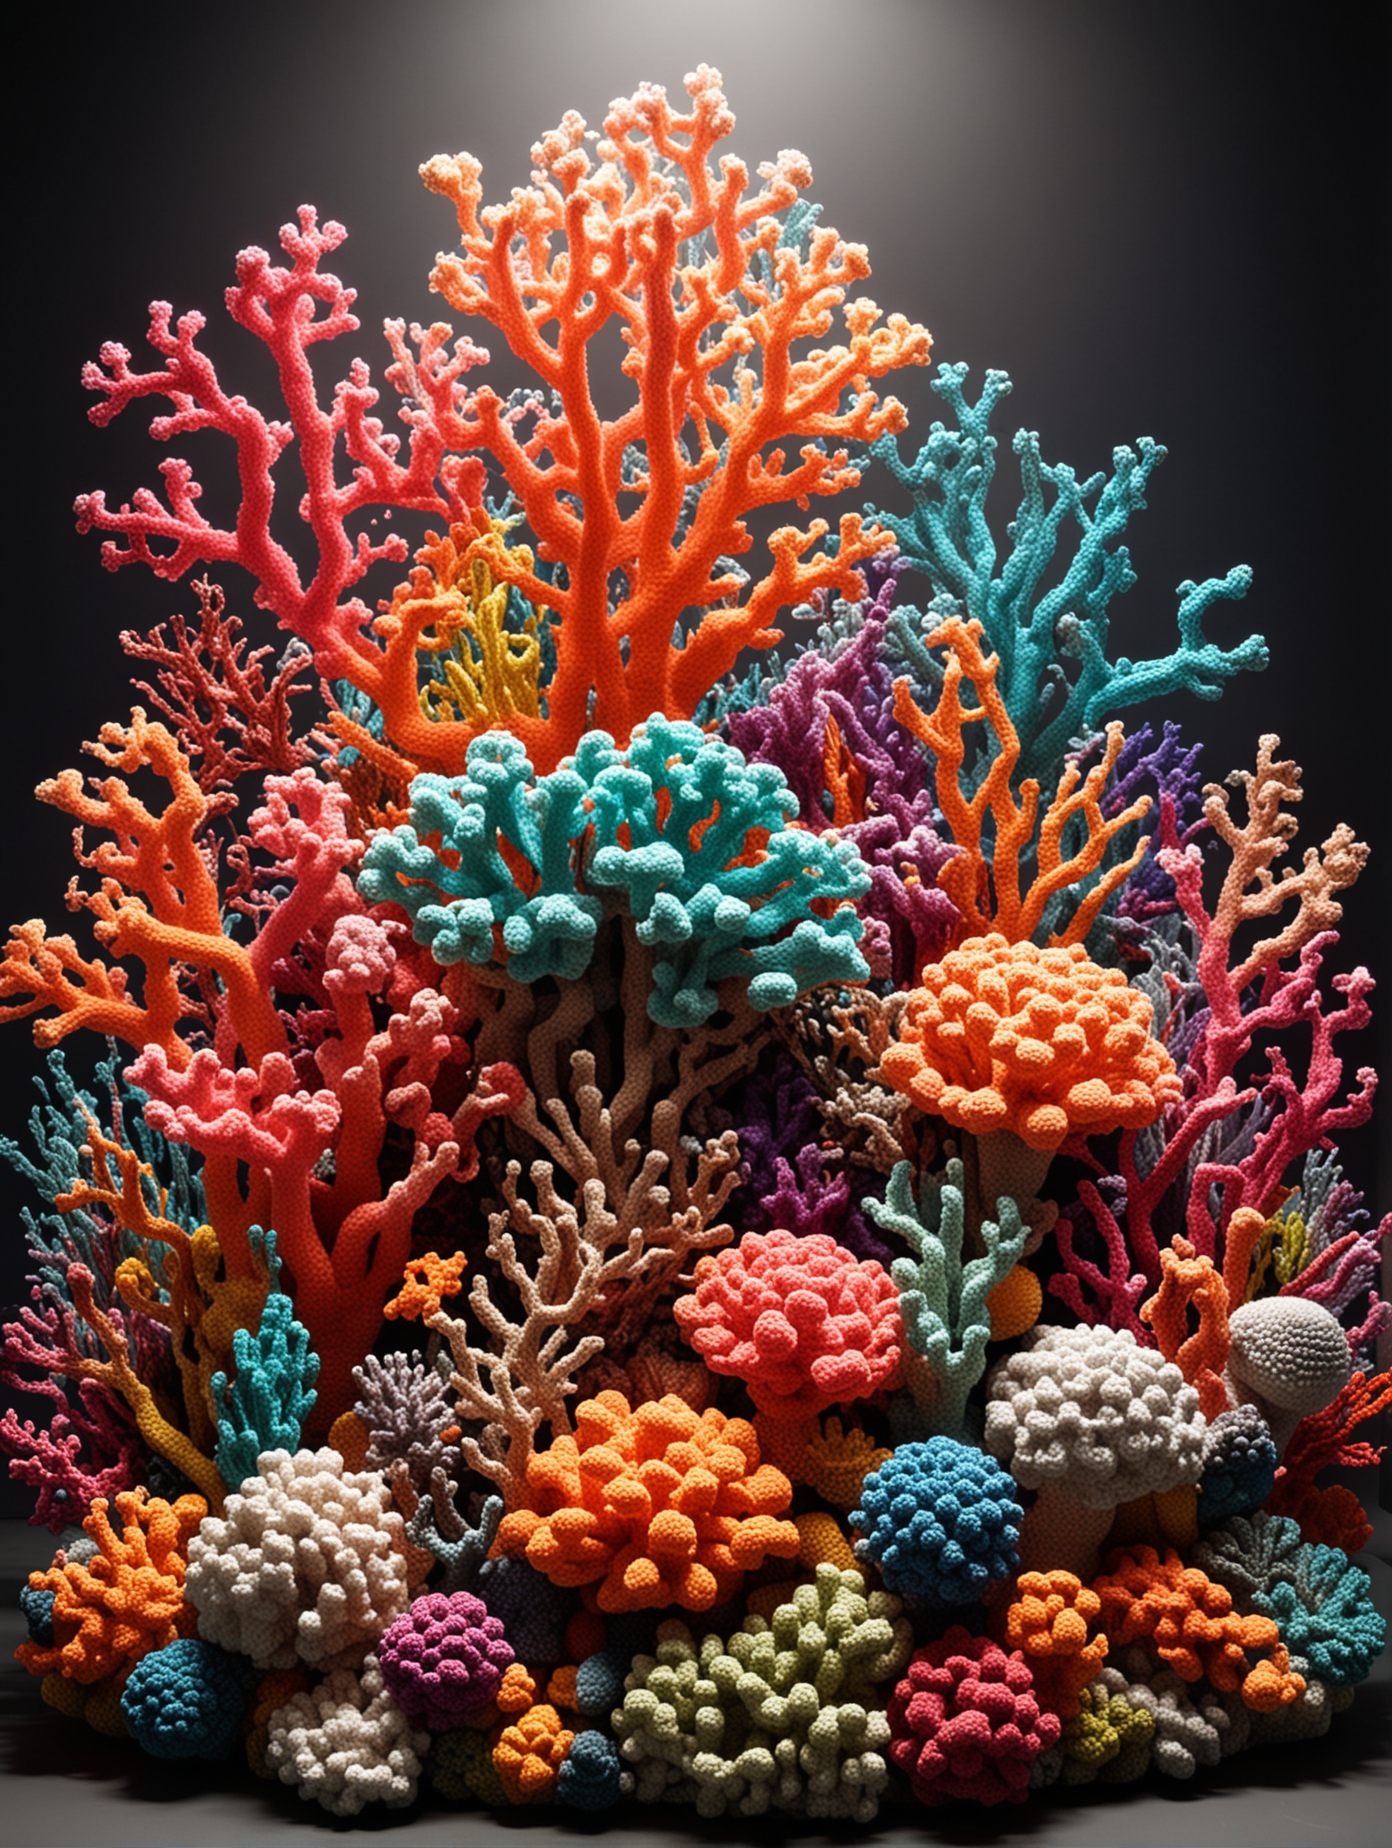 Vibrant Crocheted Coral Reef Illuminated by Singular Light Source